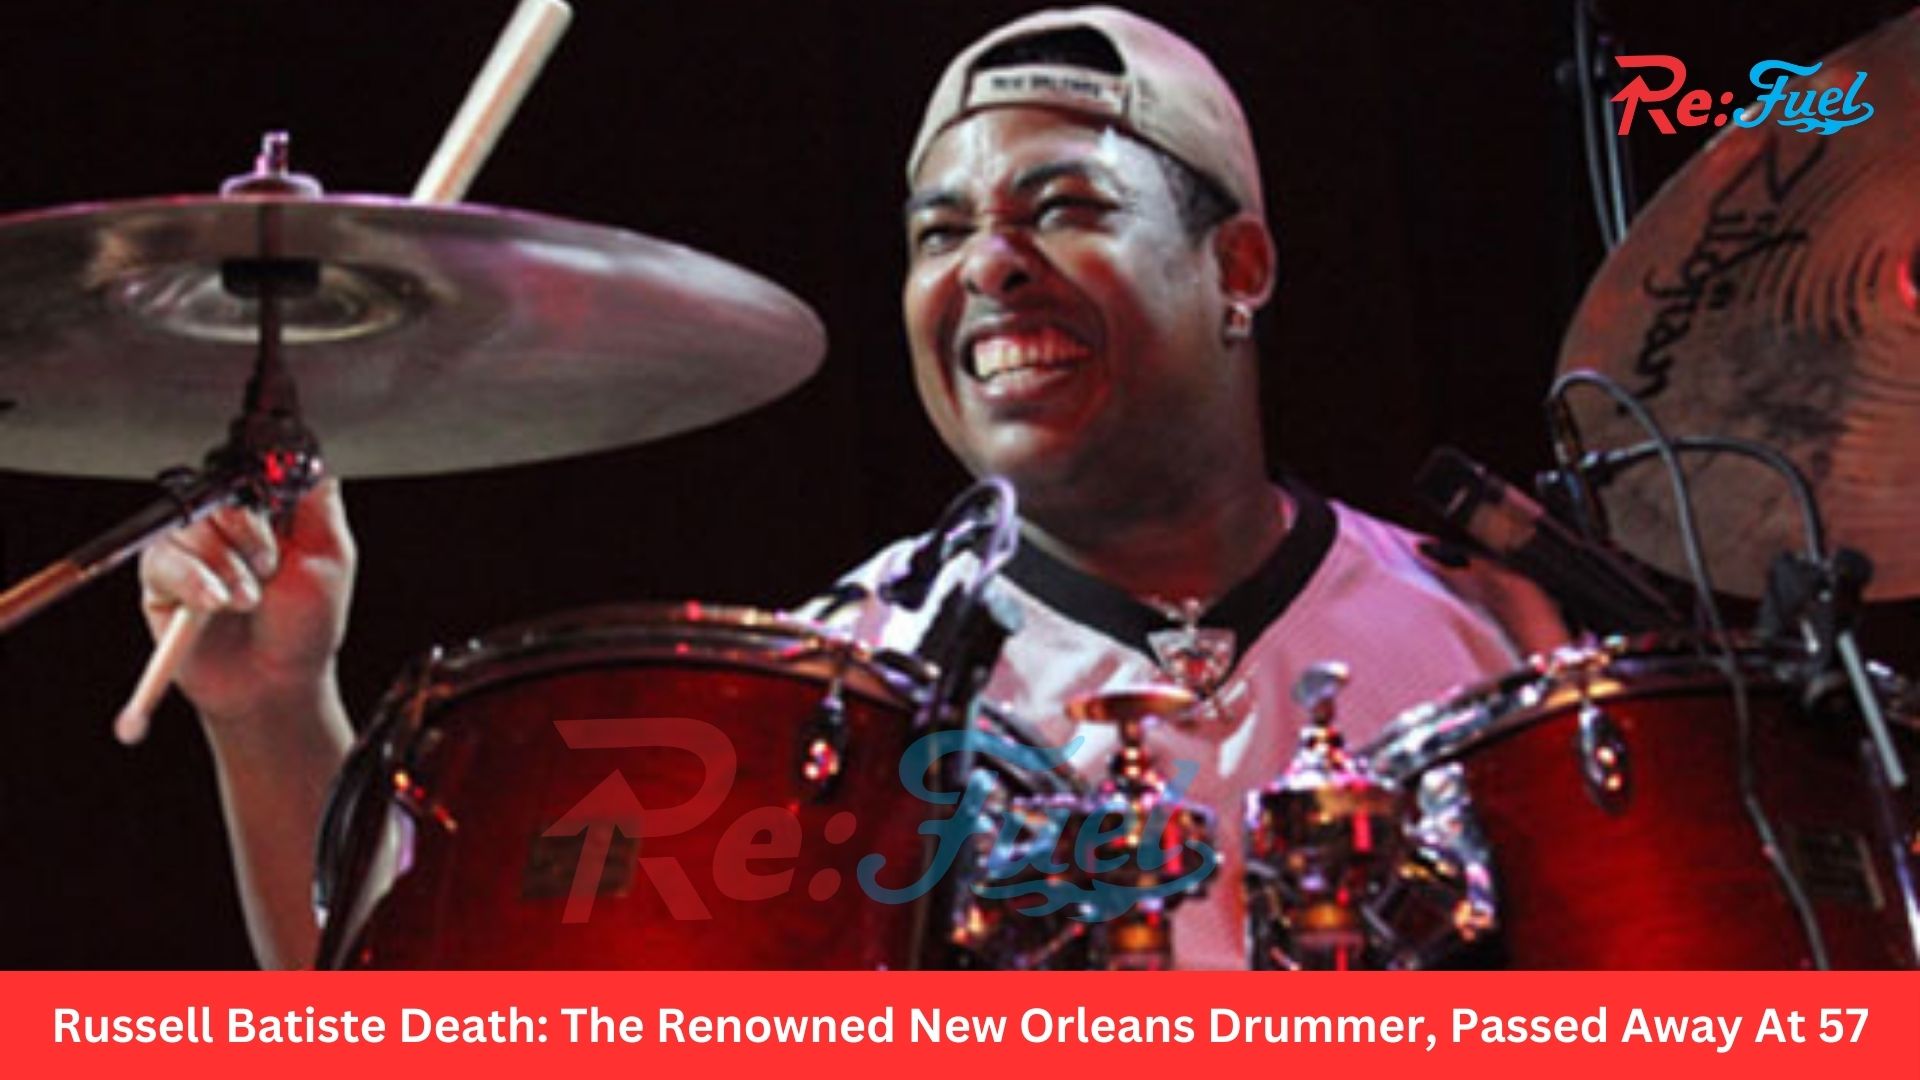 Russell Batiste Death: The Renowned New Orleans Drummer, Passed Away At 57